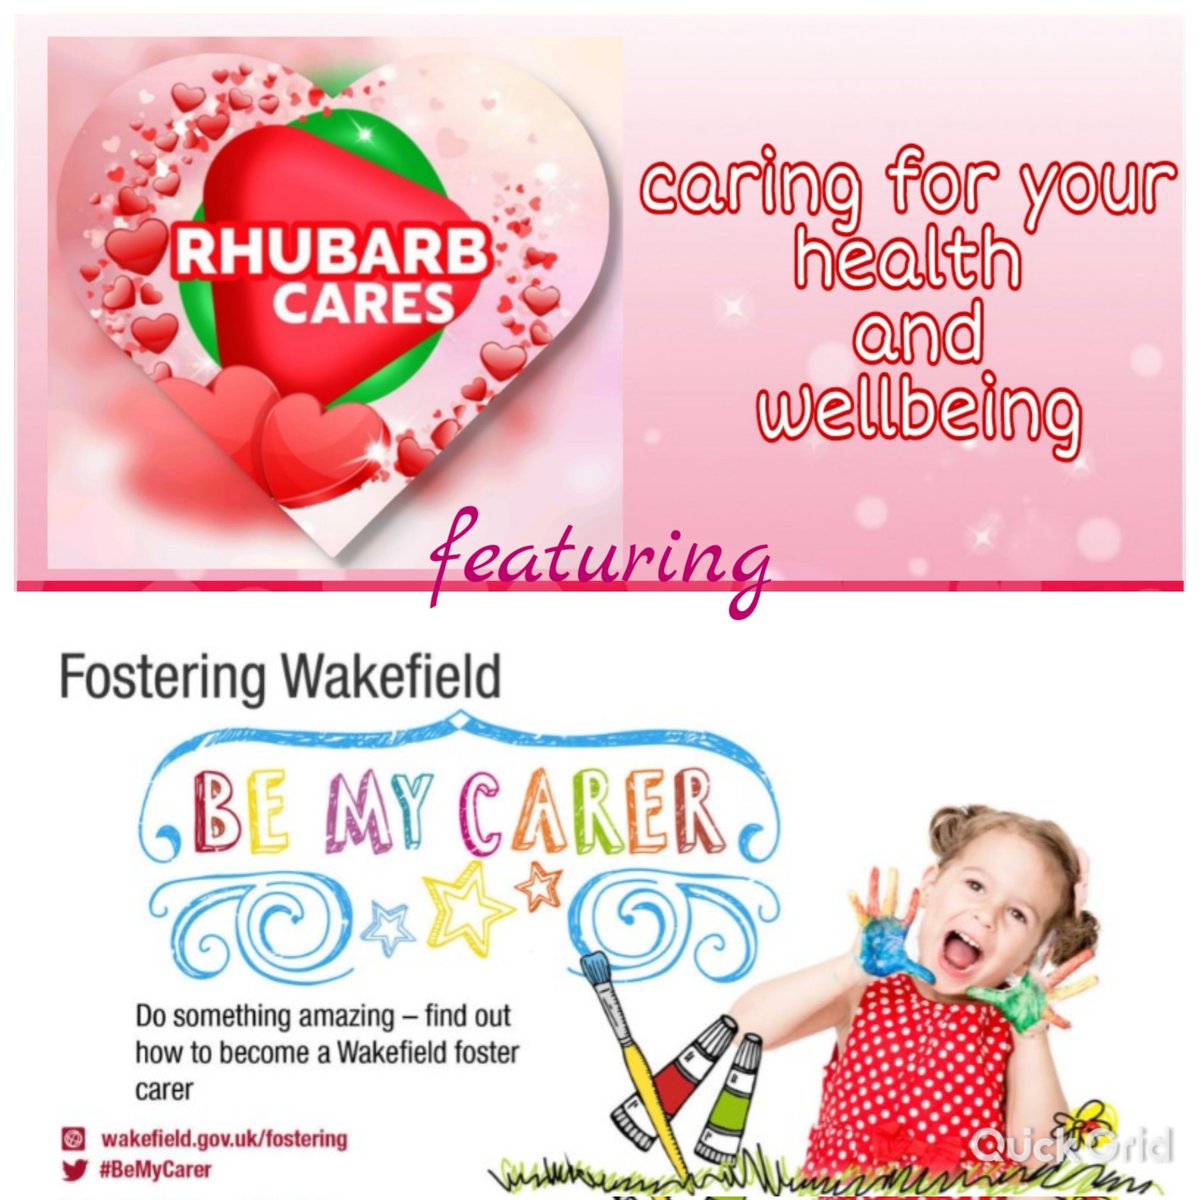 ❤️Have you ever thought about being a Foster Carer? 🙏🏼 🎙On Rhubarb Cares at 6pm this Tuesday on Rhubarb Radio, we are featuring Fostering Wakefield with Dave Adams talking to Michelle Kennedy, a foster carer with over 12 years experience.